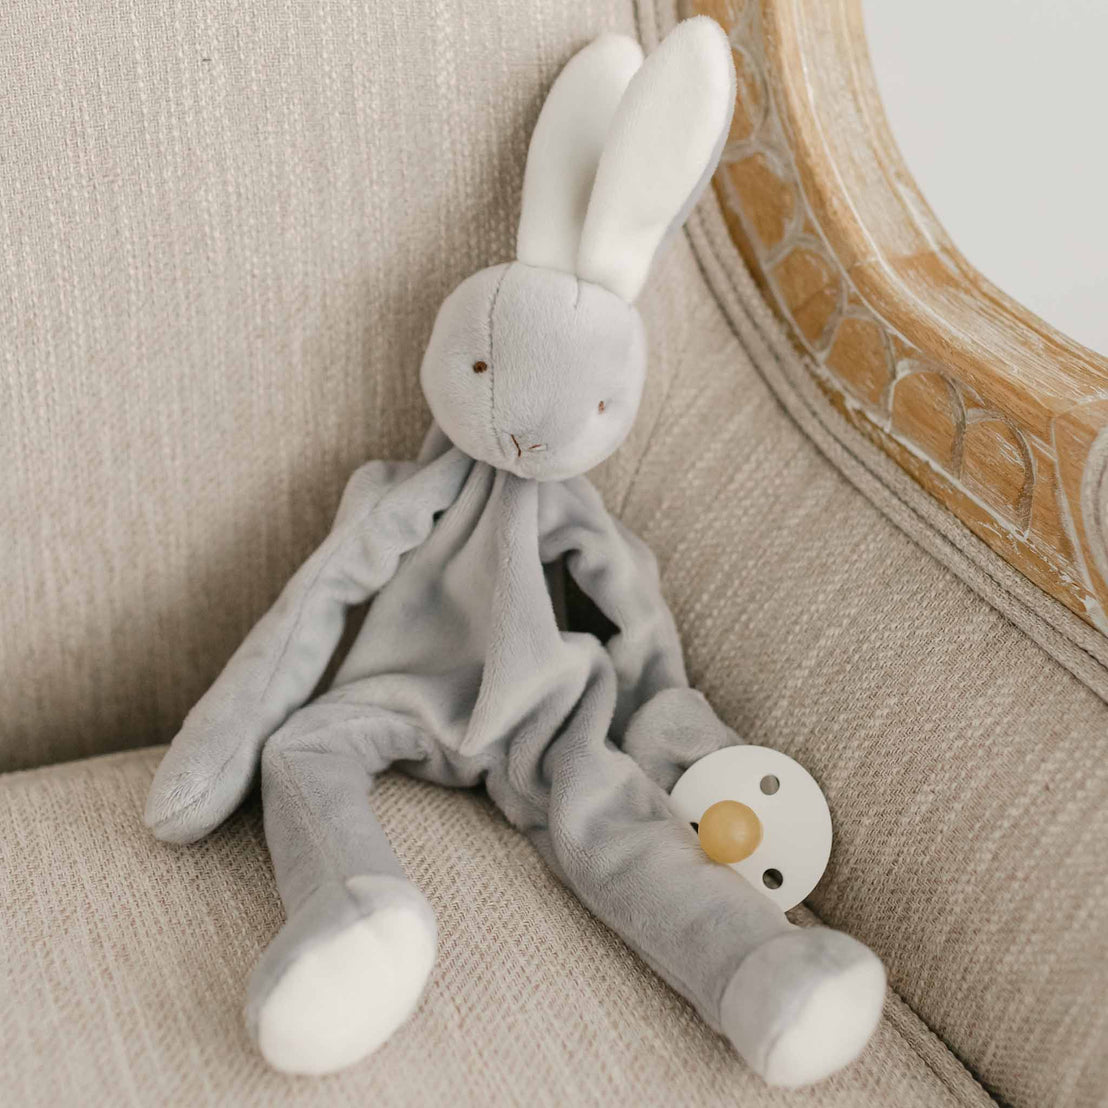 A flat lay photo of the Miles Silly Bunny Pacifier Holder. It is a grey bunny stuffed animal that can hold onto a pacifier